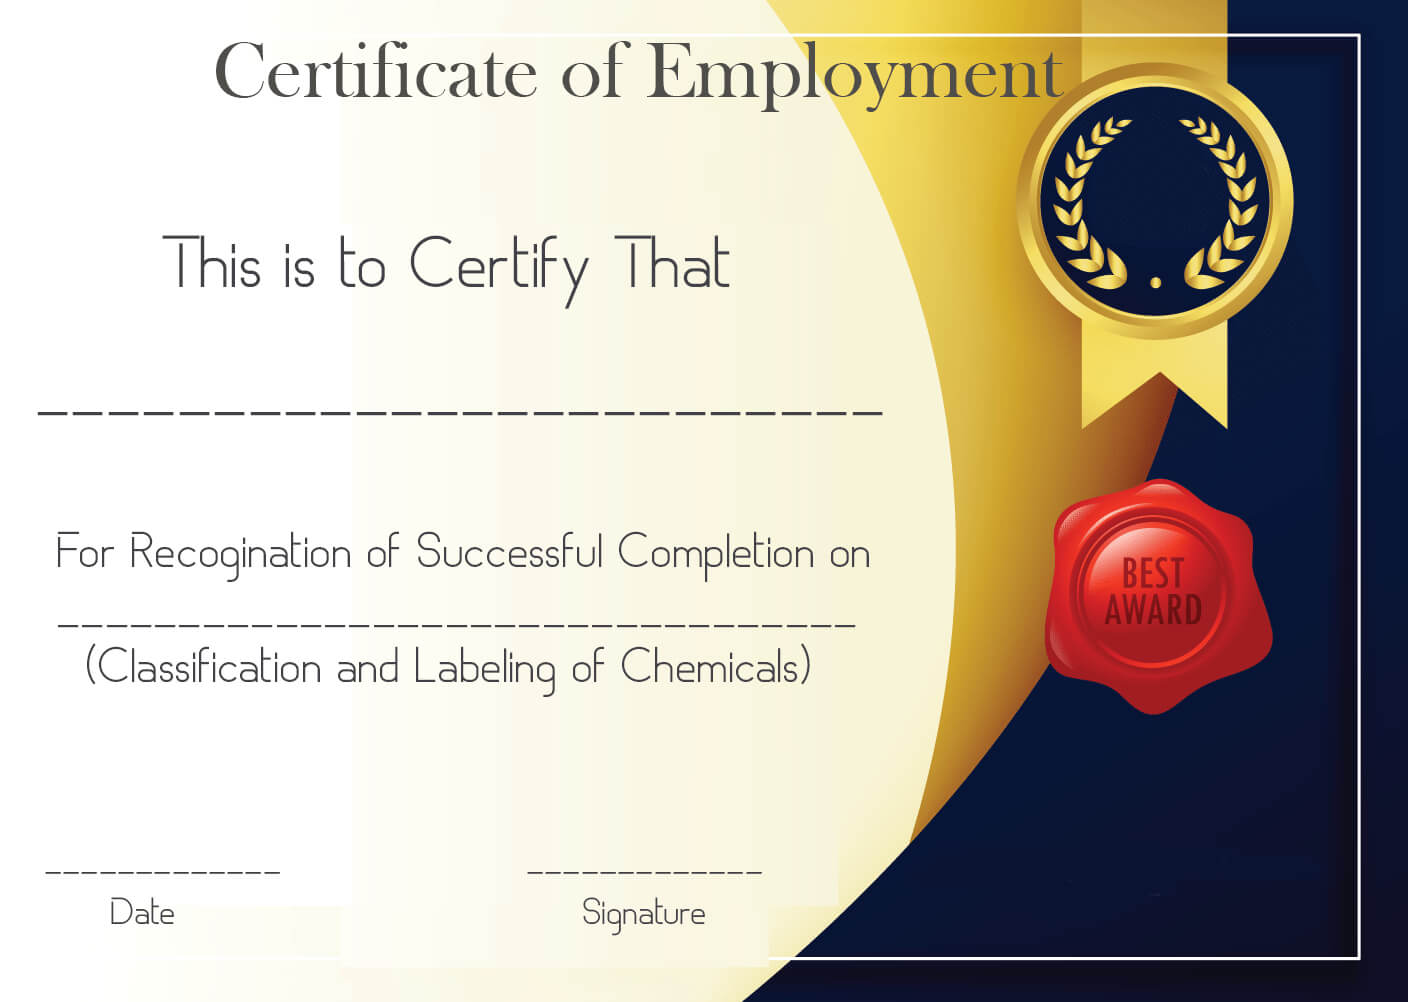 Free Sample Certificate Of Employment Template | Certificate With Certificate Of Employment Template